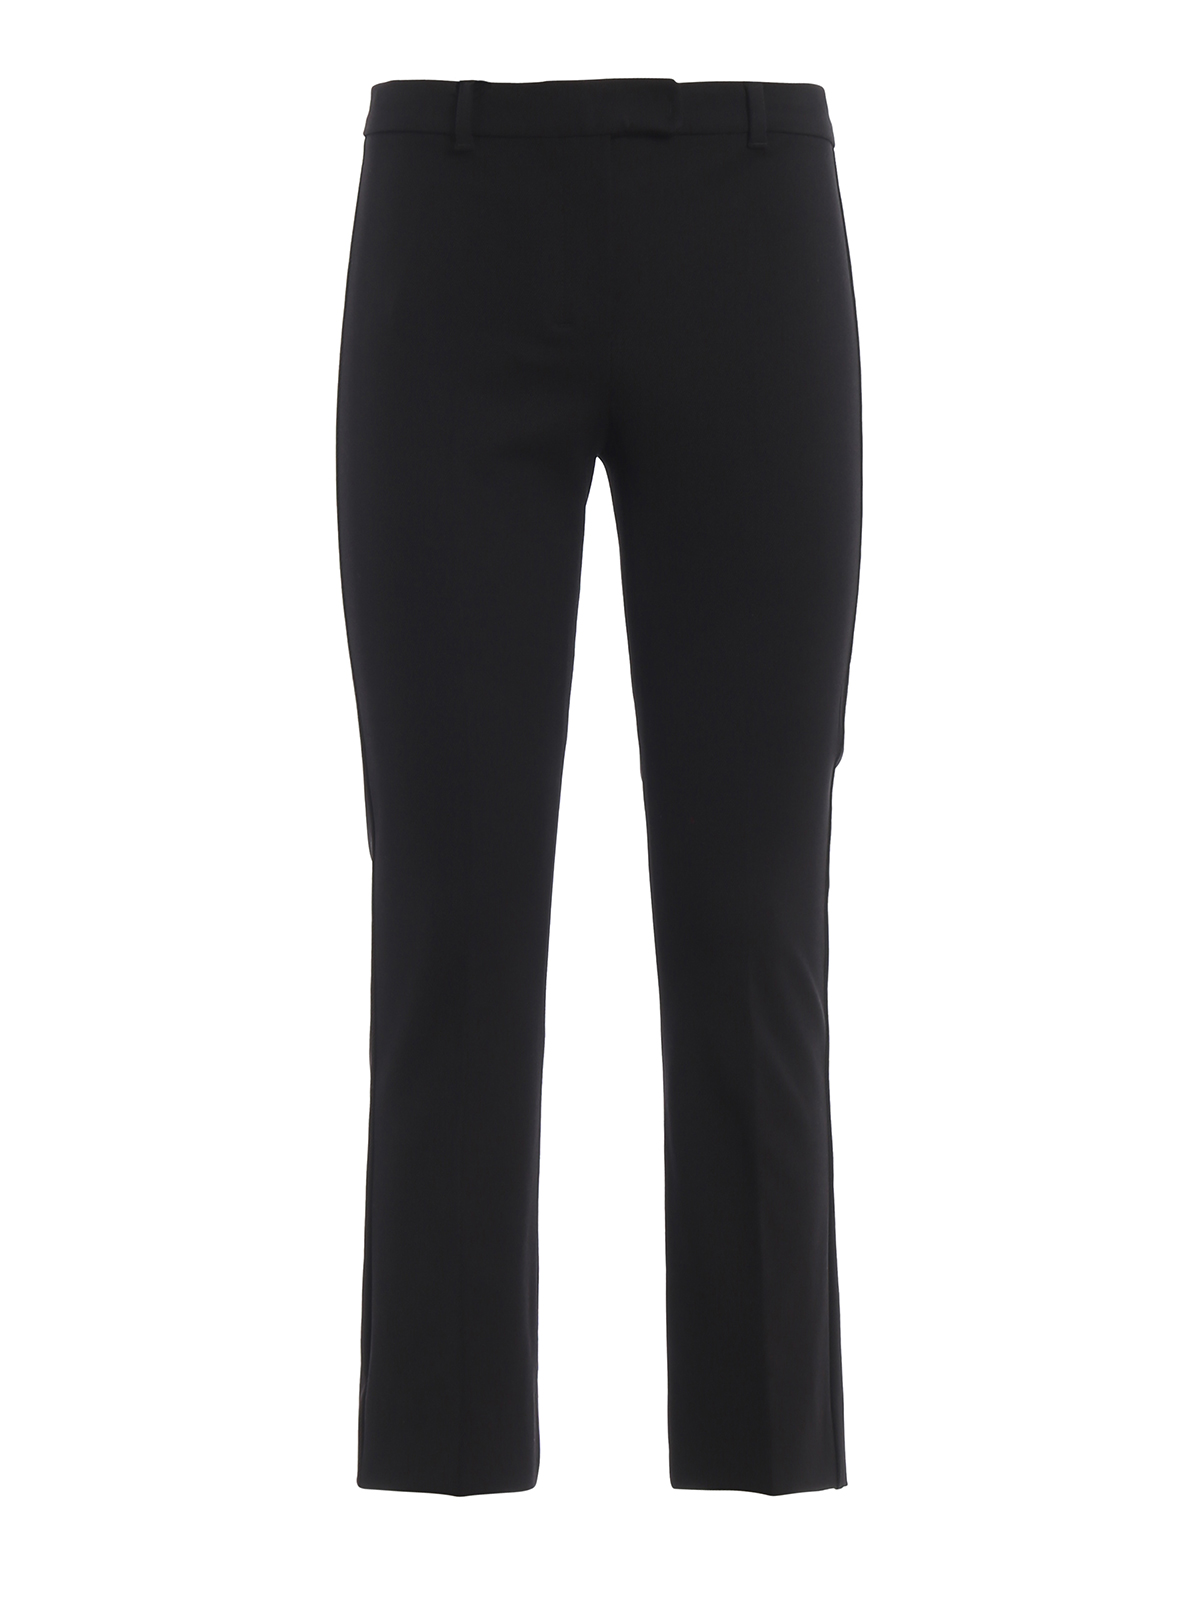 Buy DOROTHY PERKINS Women Black Solid Regular Fit Bootcut Trousers   Trousers for Women 7199344  Myntra